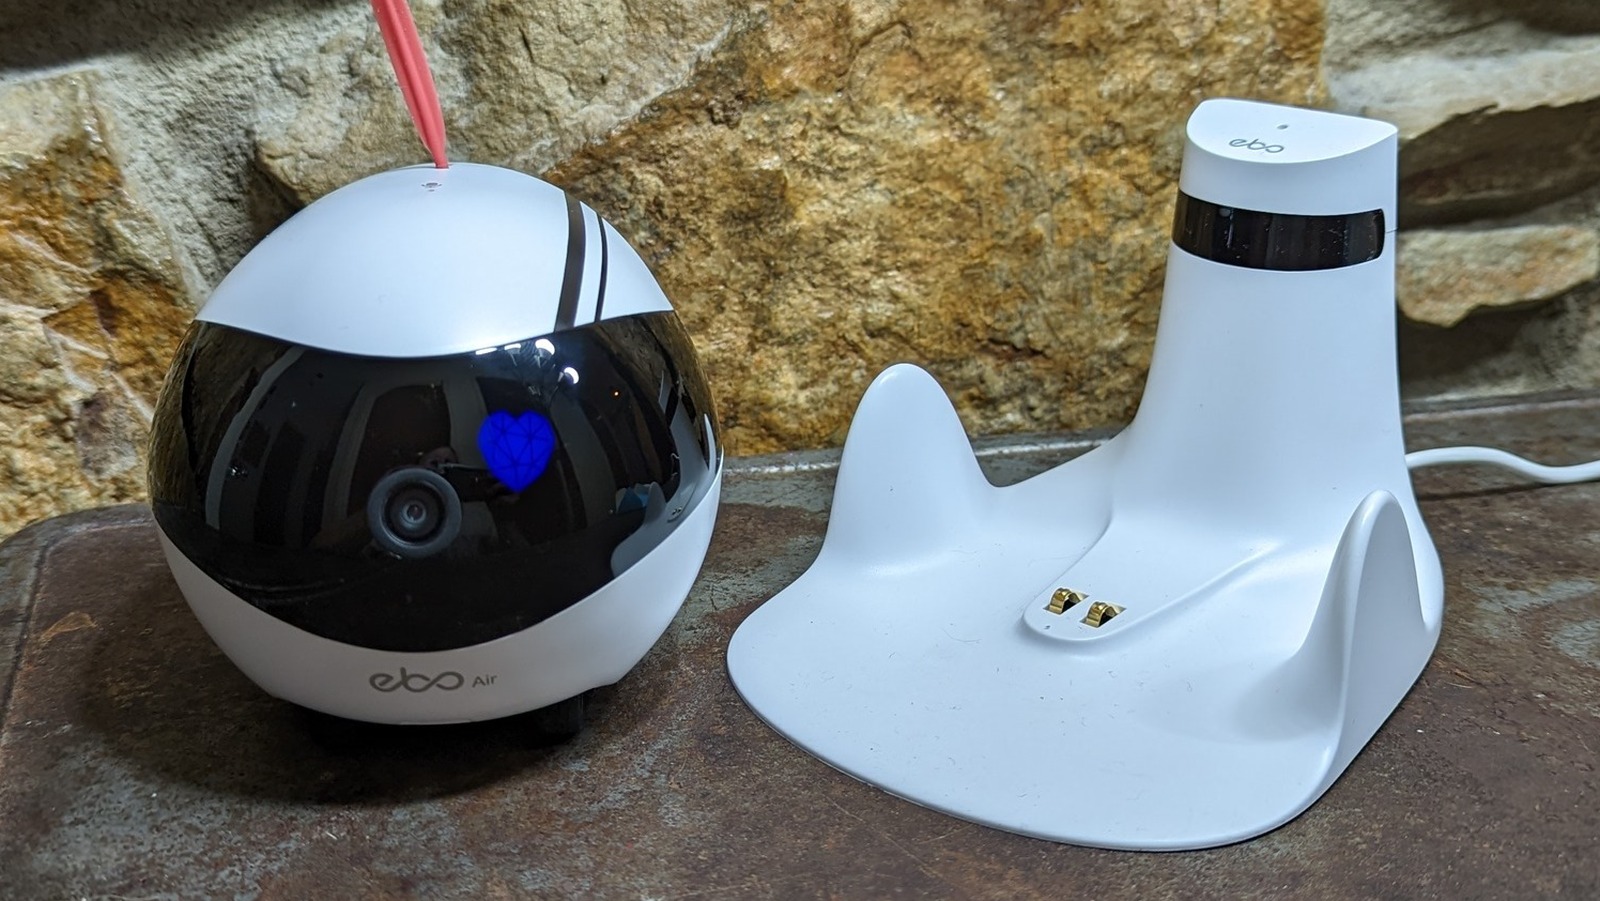 Enabot Ebo Pro Review: A Wobbly Robotic Toy for Your Cat